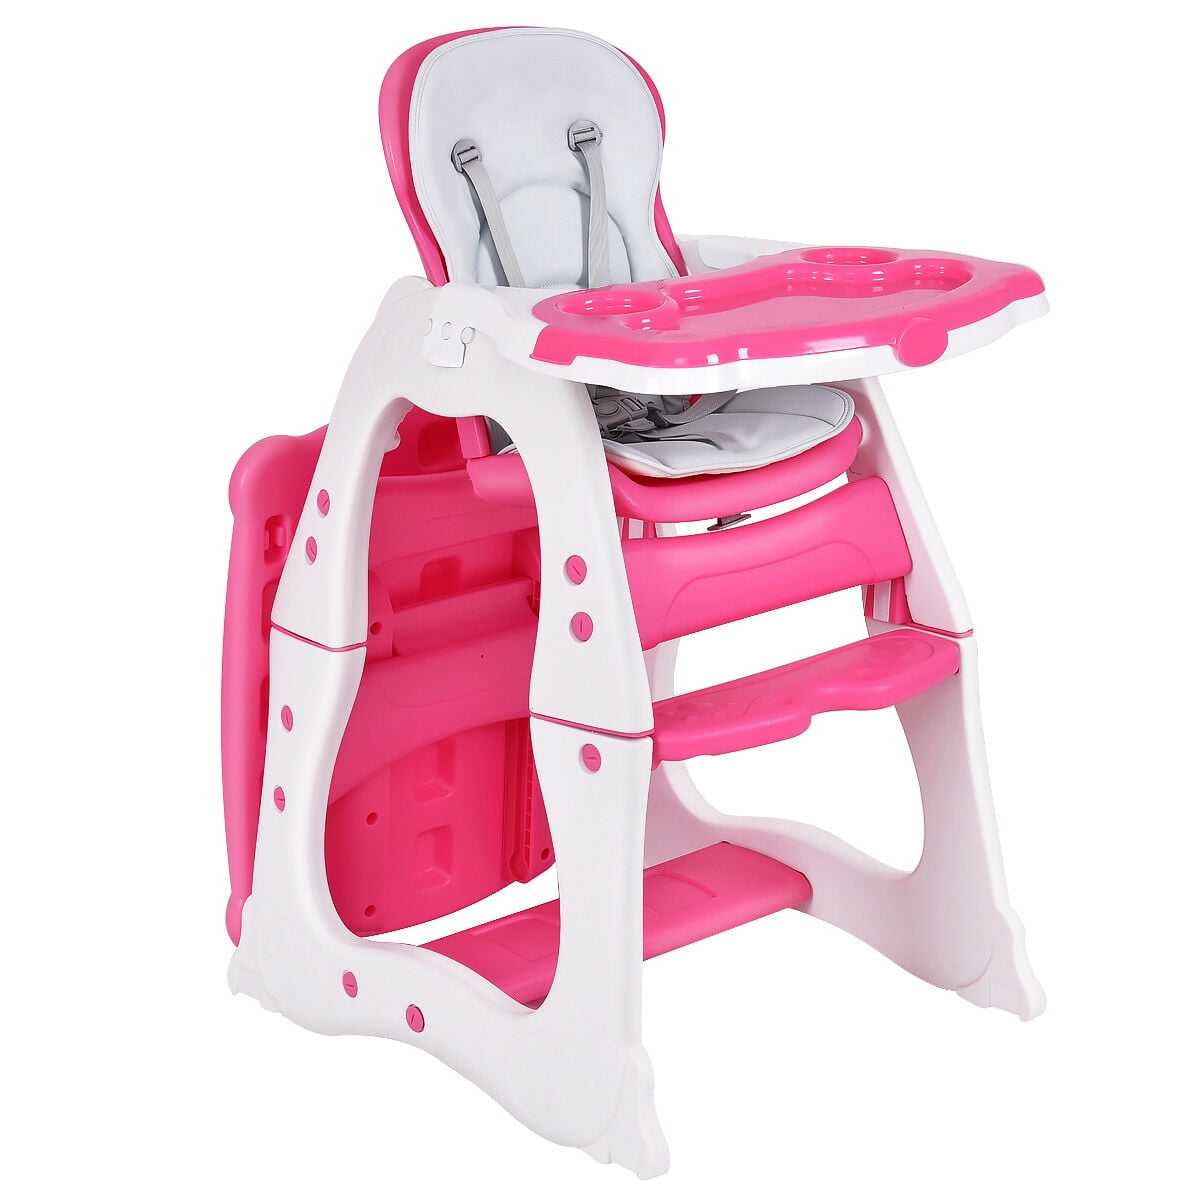 Storage Basket Safety Harness COSTWAY Convertible Baby Highchair Toddlers Rocking Chair Booster Seat with Double Removable Tray Height Adjustable Infants Feeding Chair for 6 Months-6 Years